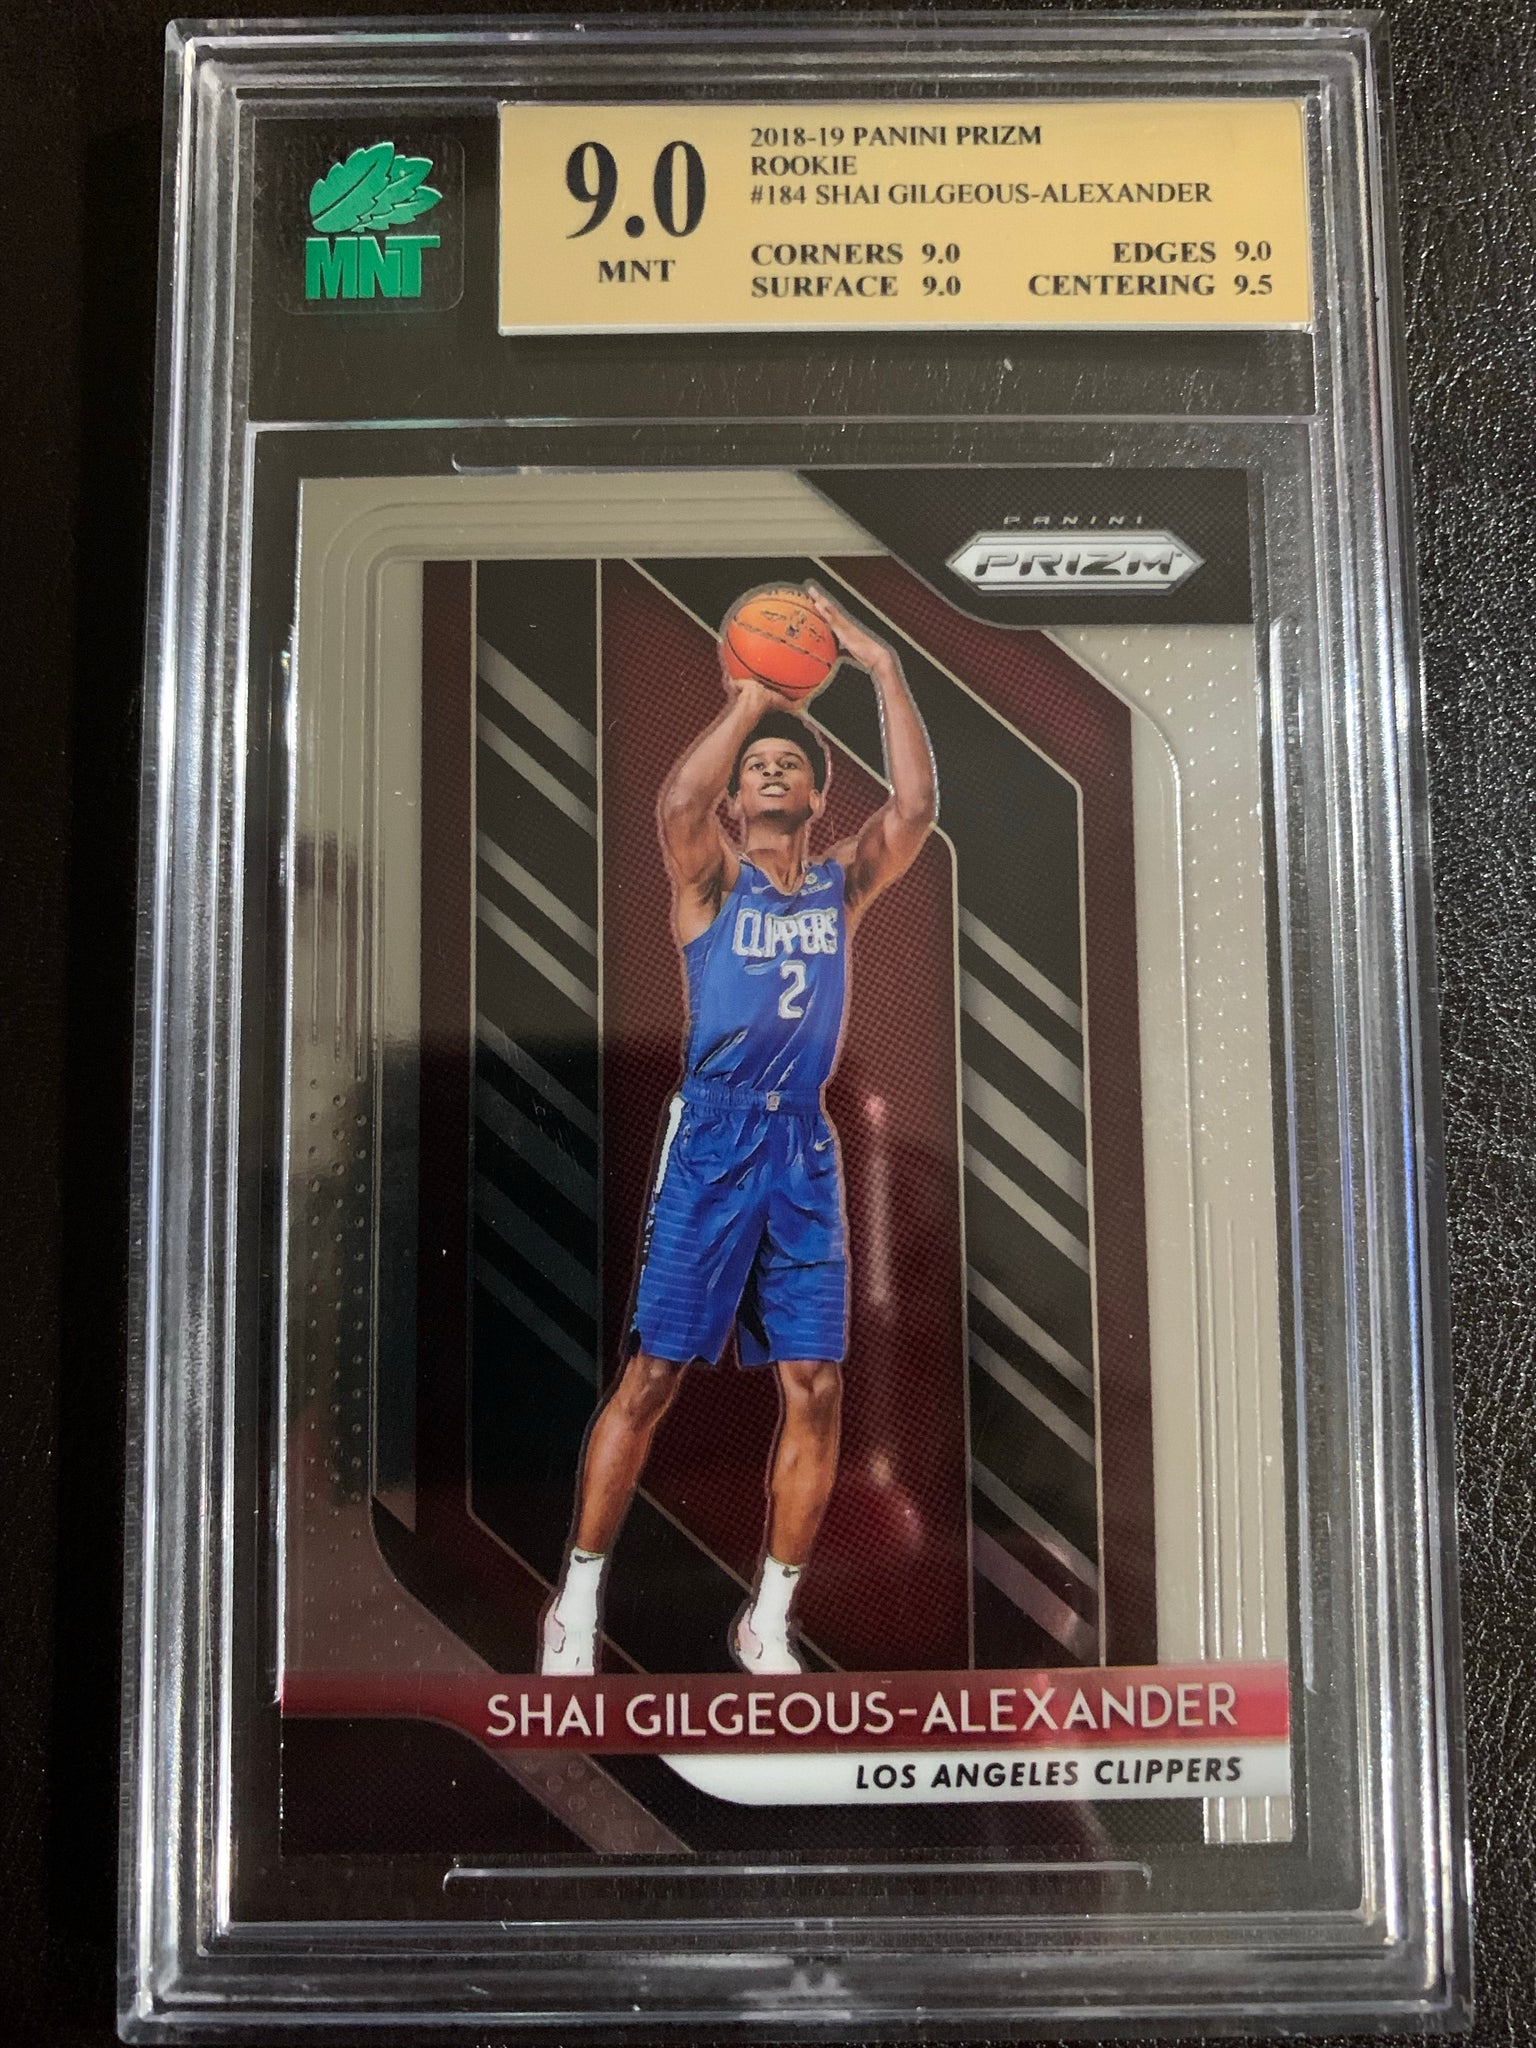 2018-19 PANINI PRIZM BASKETBALL #184 LOS ANGELES CLIPPERS - SHAI GILGEOUS-ALEXANDER ROOKIE CARD GRADED MNT 9.0 MINT